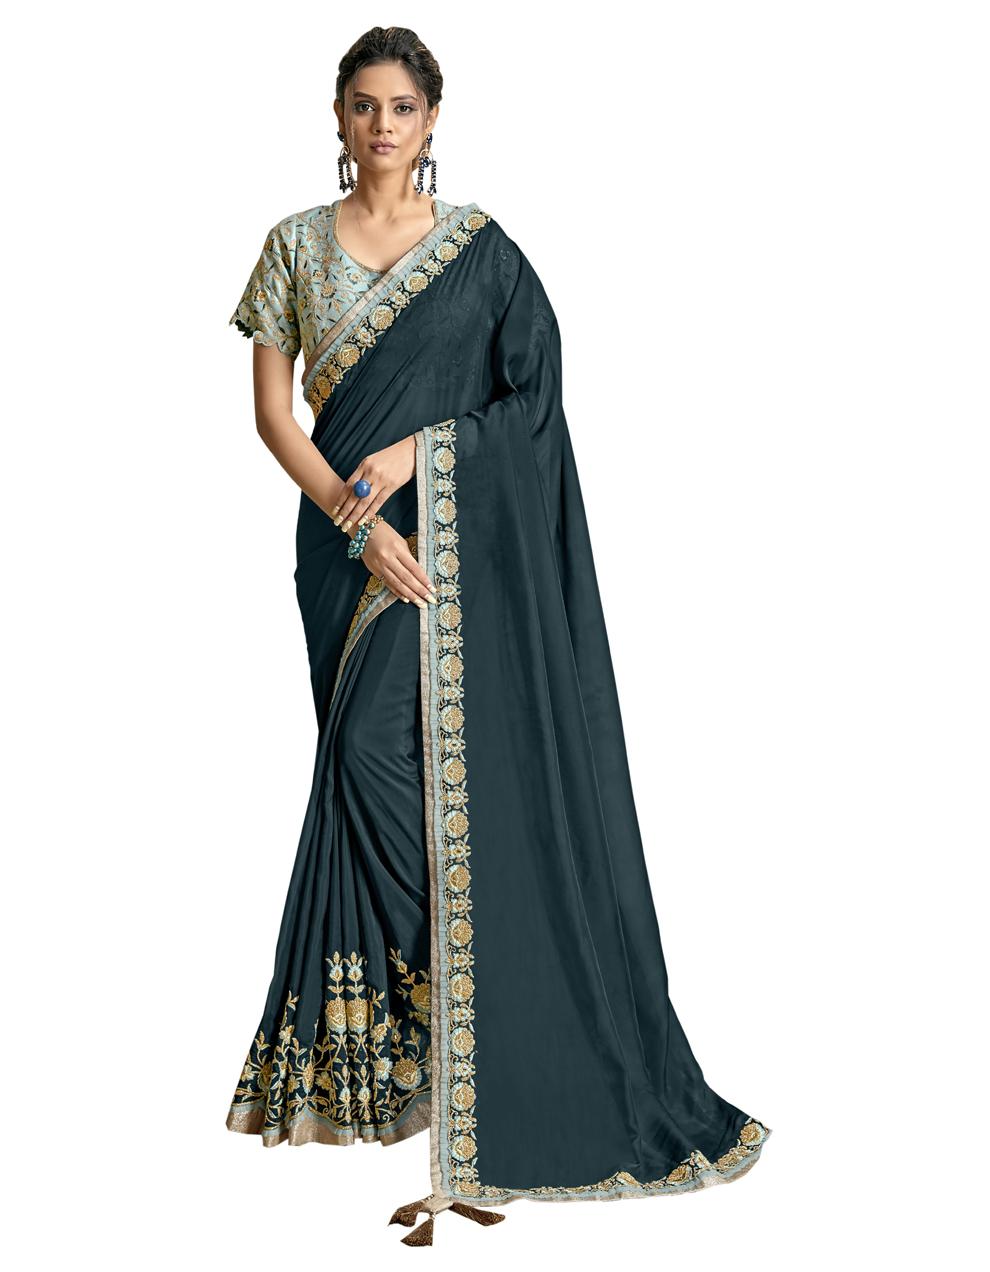 Teal Blue Satin Georgette Saree With Blouse MH23946